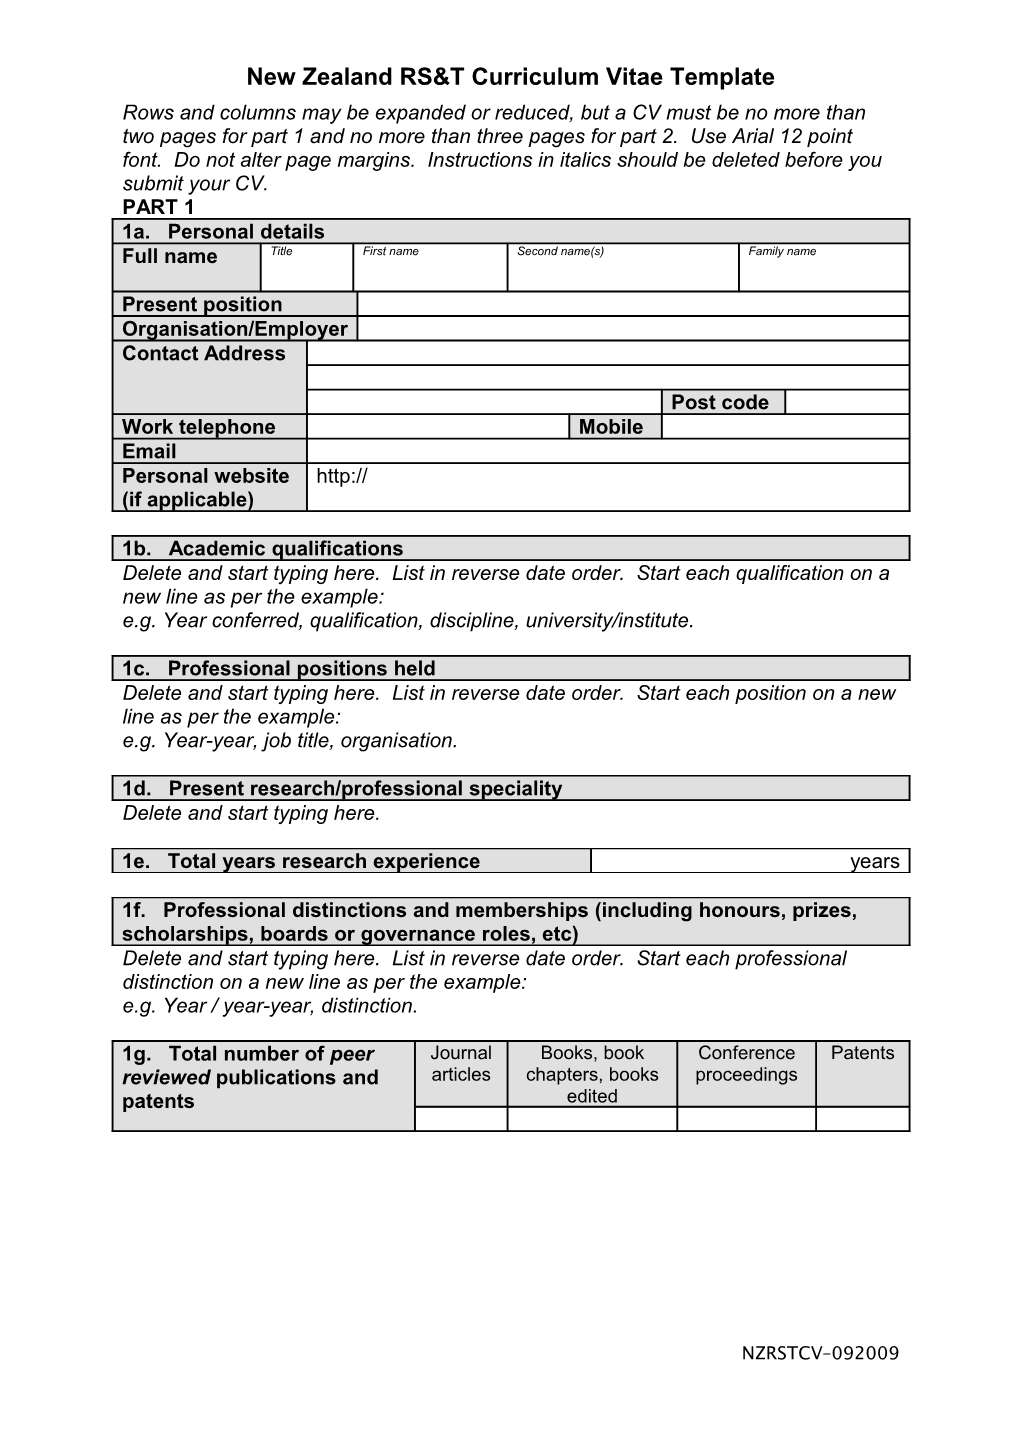 New Zealand RS&T Curriculum Vitae Template